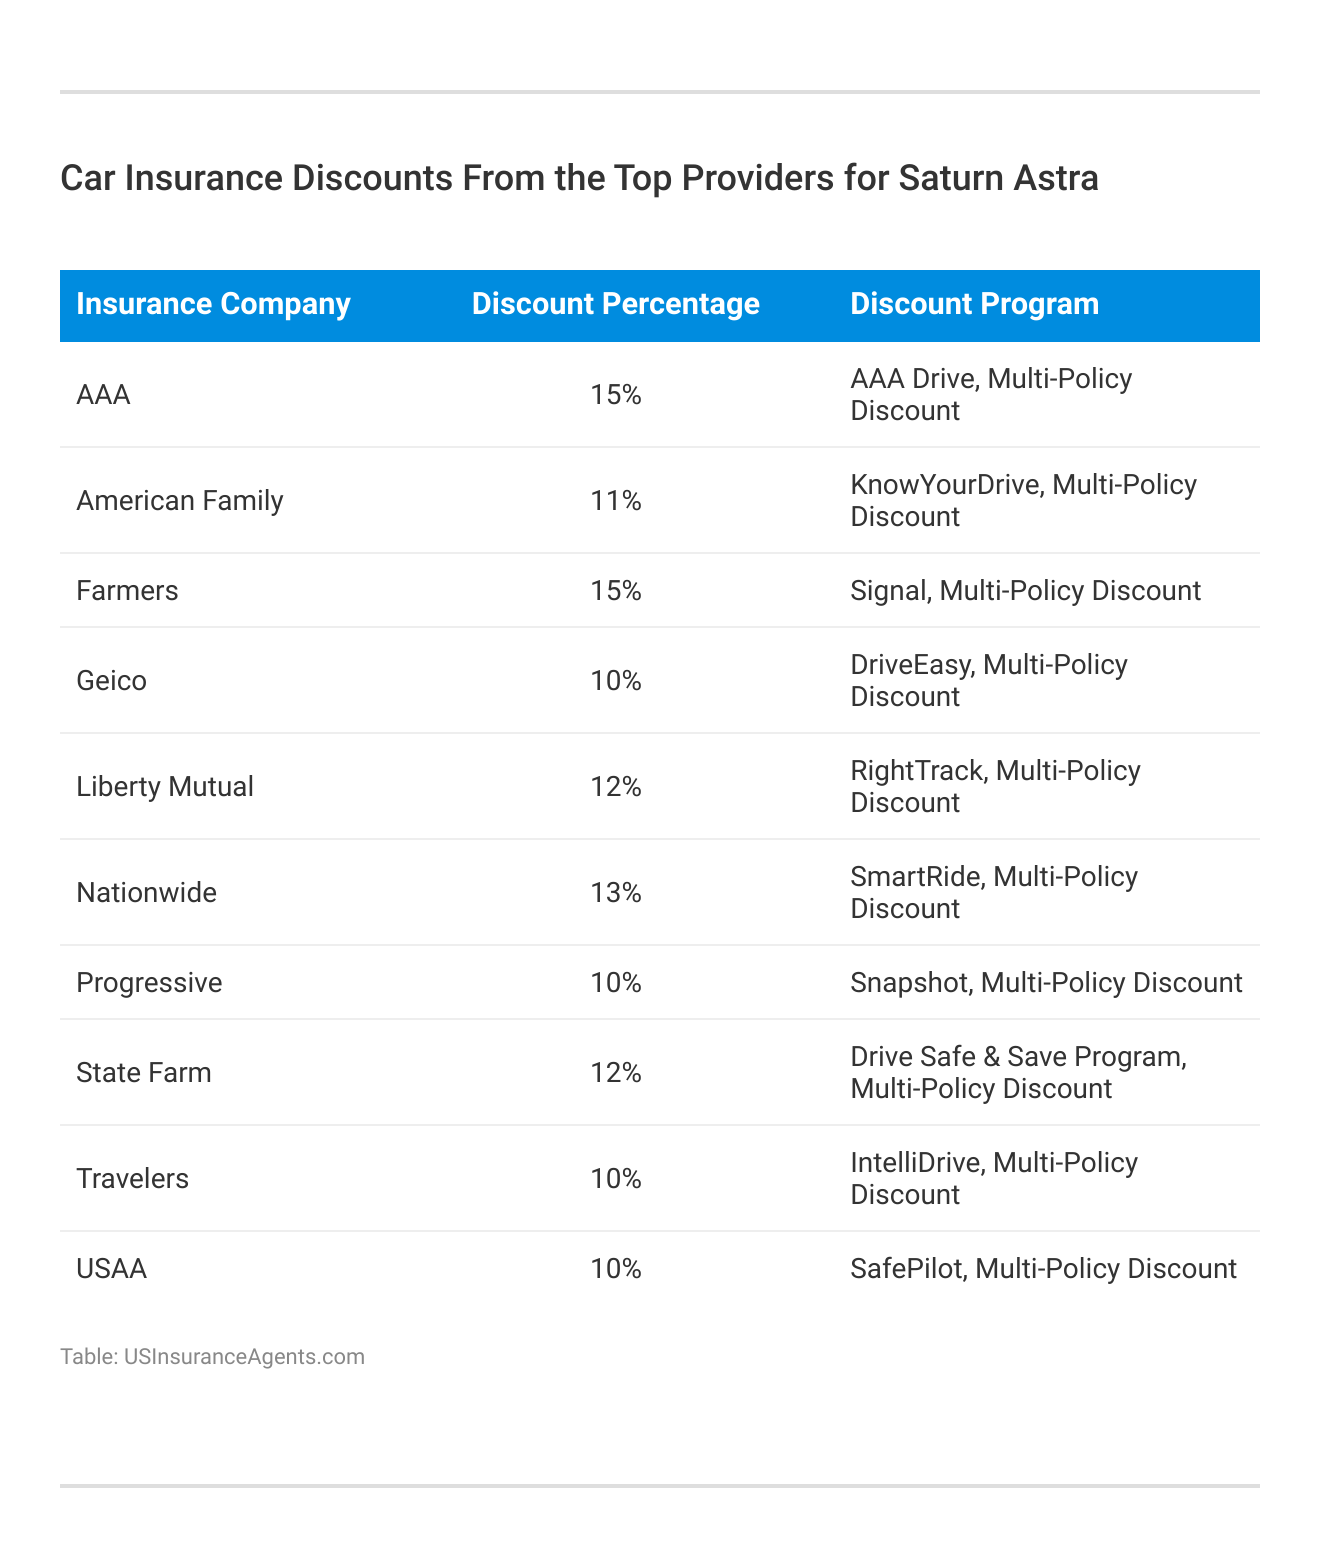 <h3>Car Insurance Discounts From the Top Providers for Saturn Astra</h3>